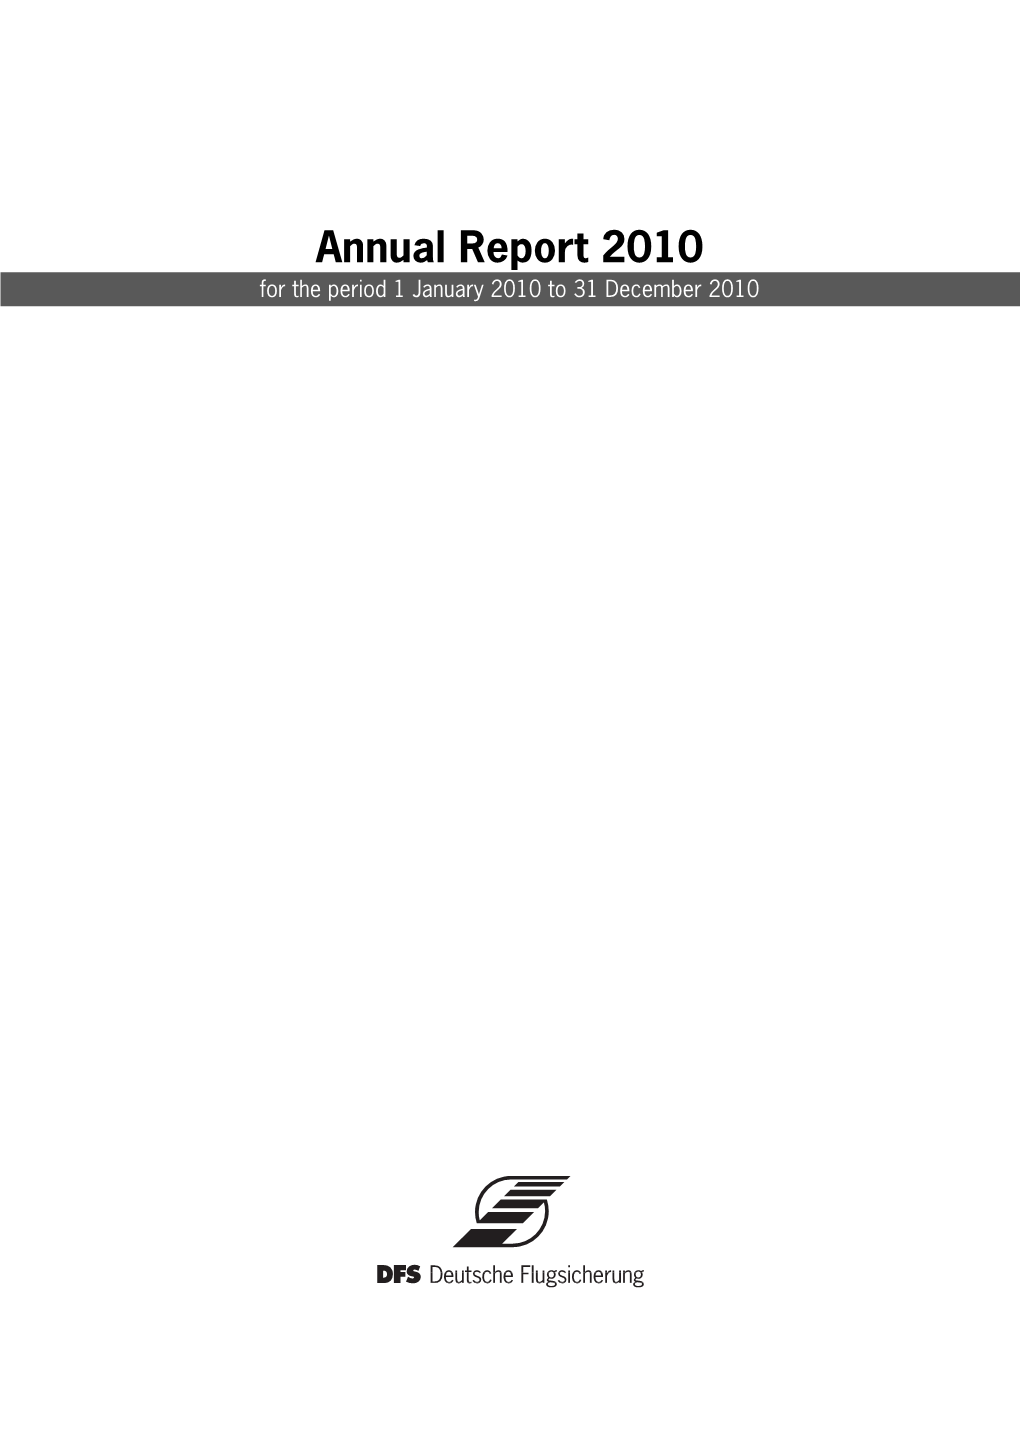 Annual Report 2010 for the Period 1 January 2010 to 31 December 2010 You Can Download and Order This Report At